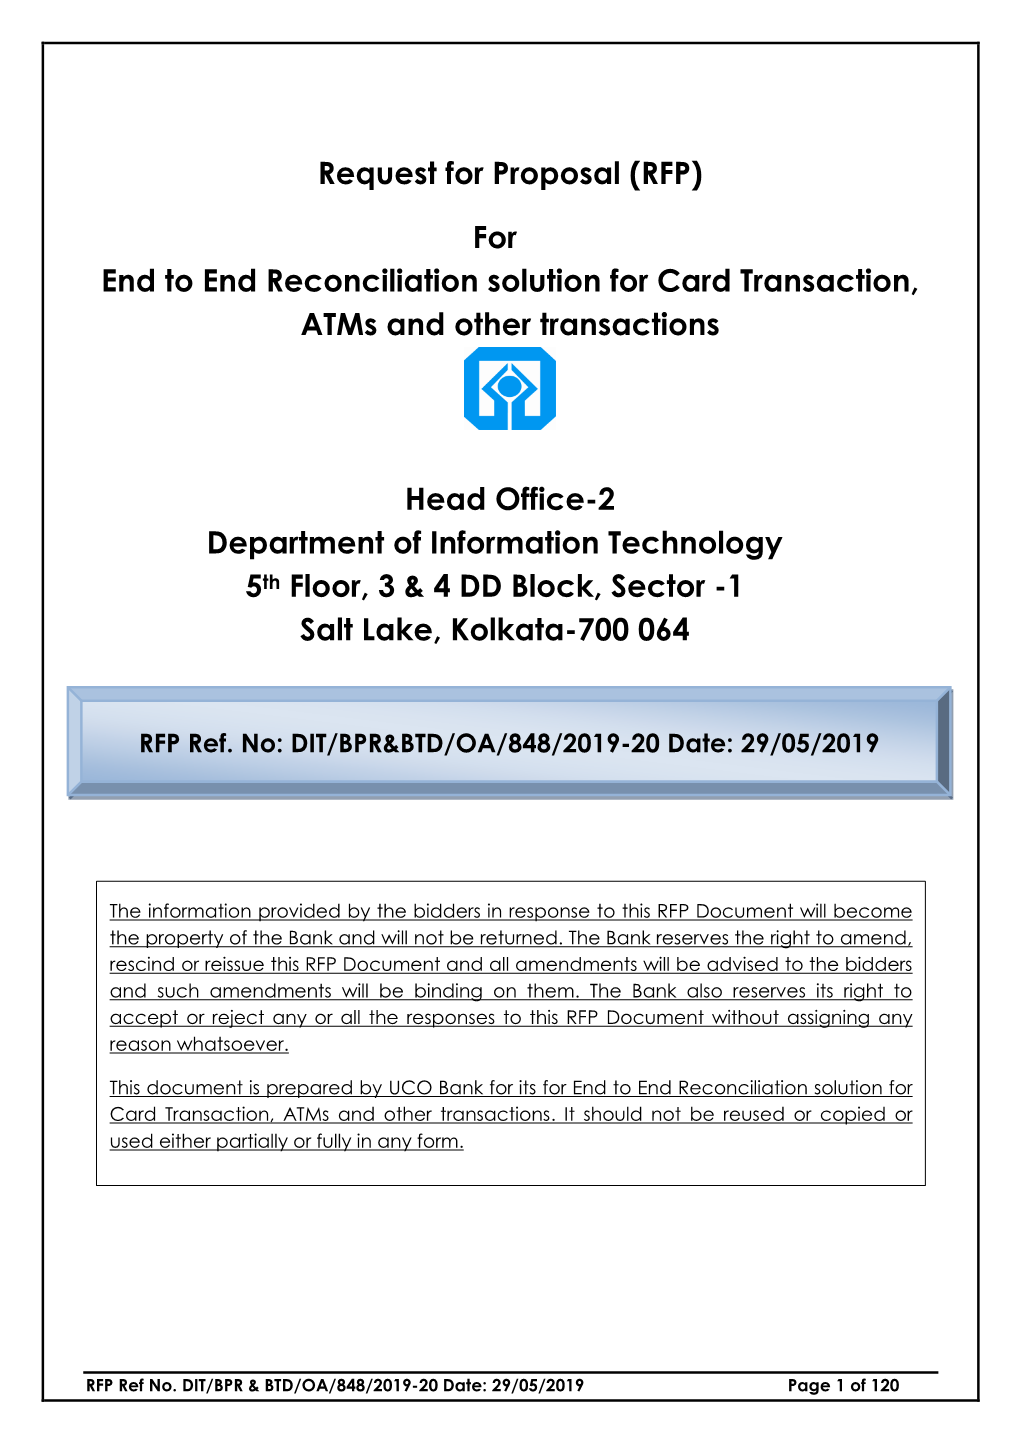 Request for Proposal (RFP) for End to End Reconciliation Solution For